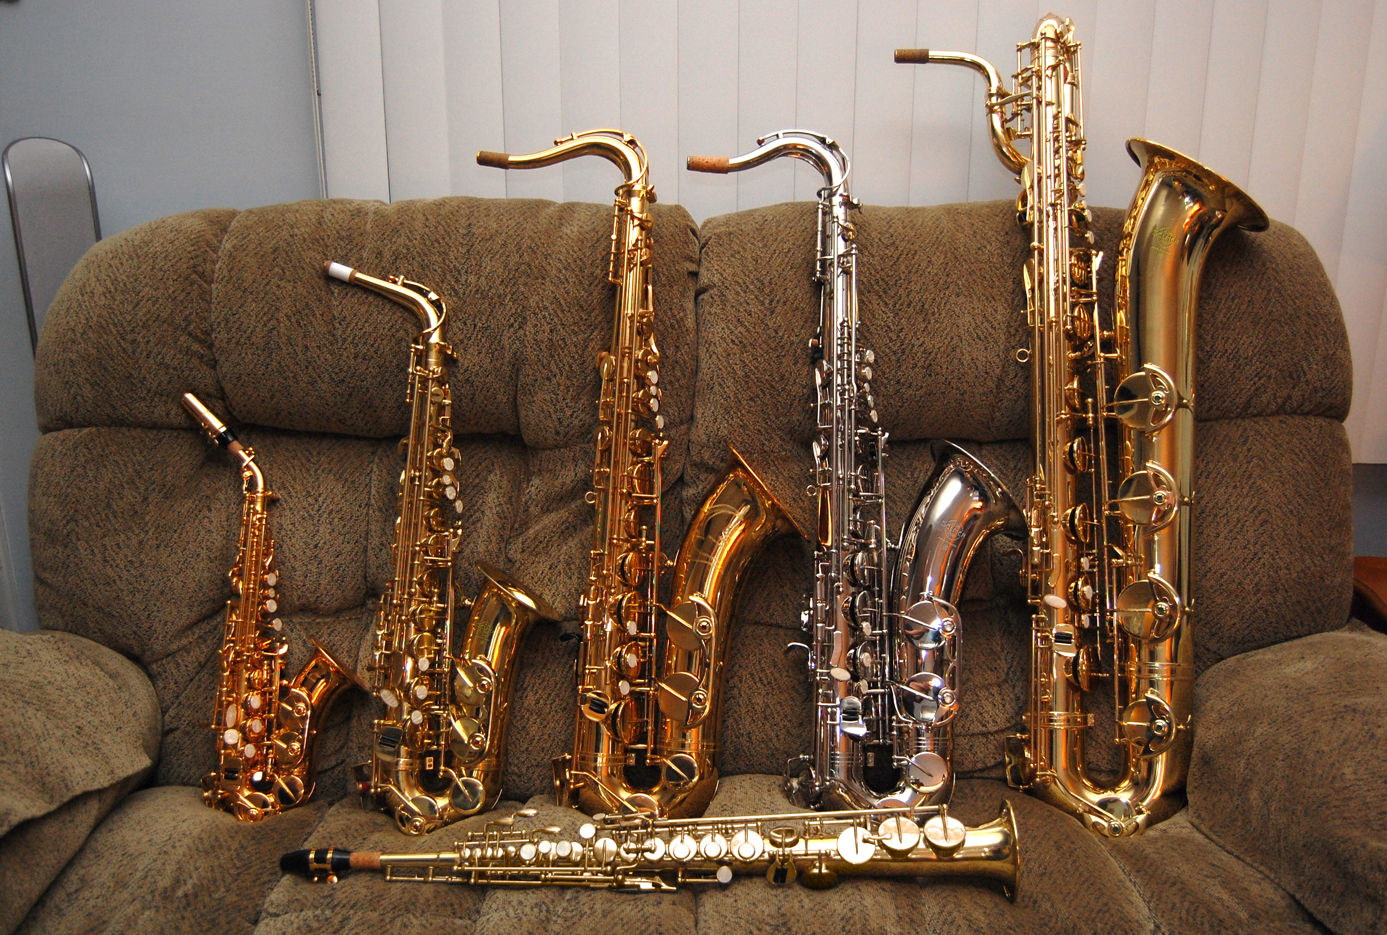 Baritone Saxophone Wallpaper My Sax Collection By Pat